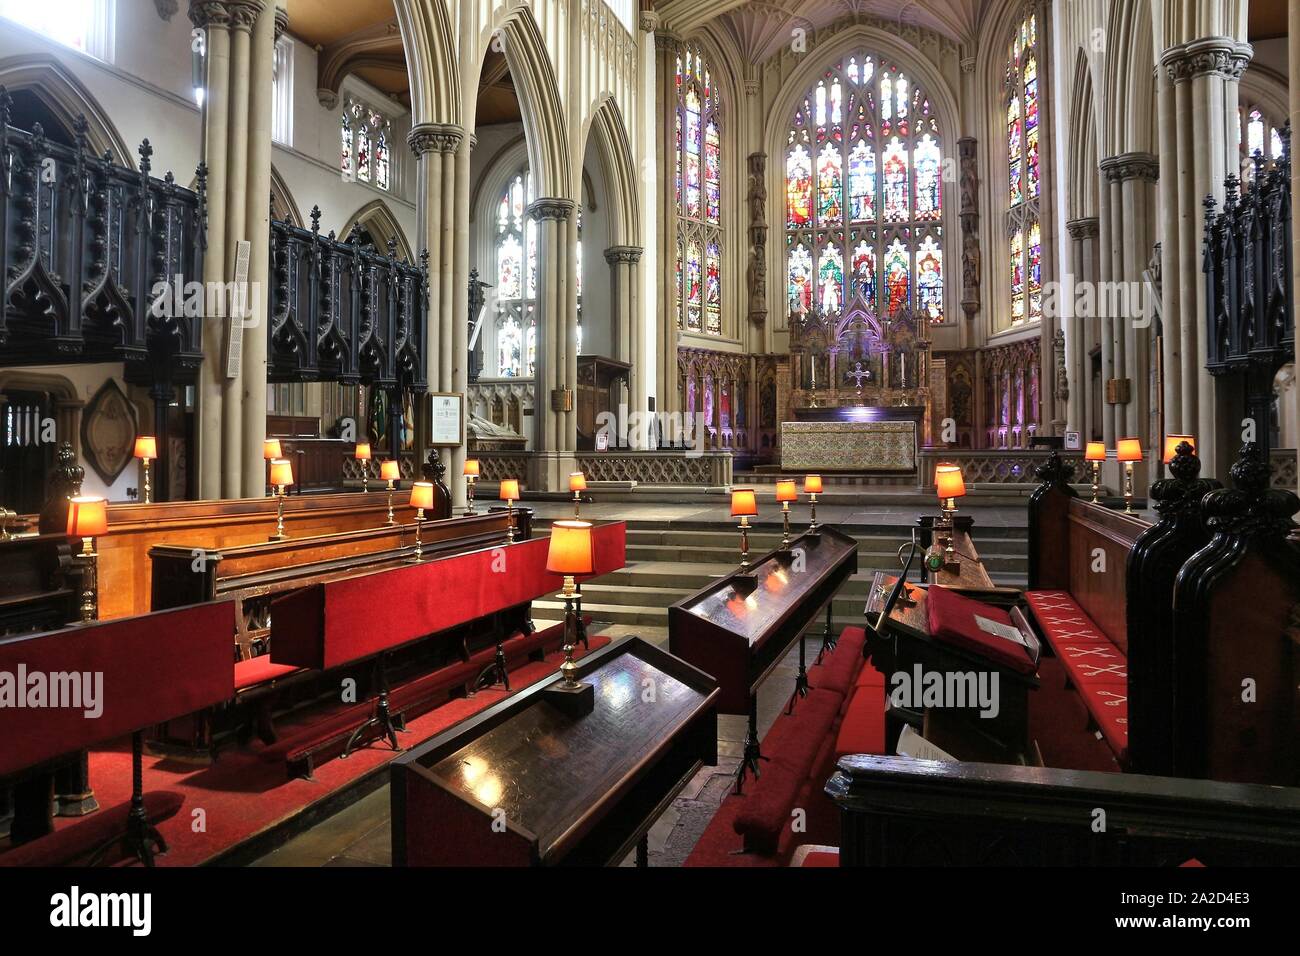 LEEDS, UK - JULY 11, 2016: Interior view of Leeds Minster, or the Minster and Parish Church of Saint Peter at Leeds, UK. The landmark was consecrated Stock Photo